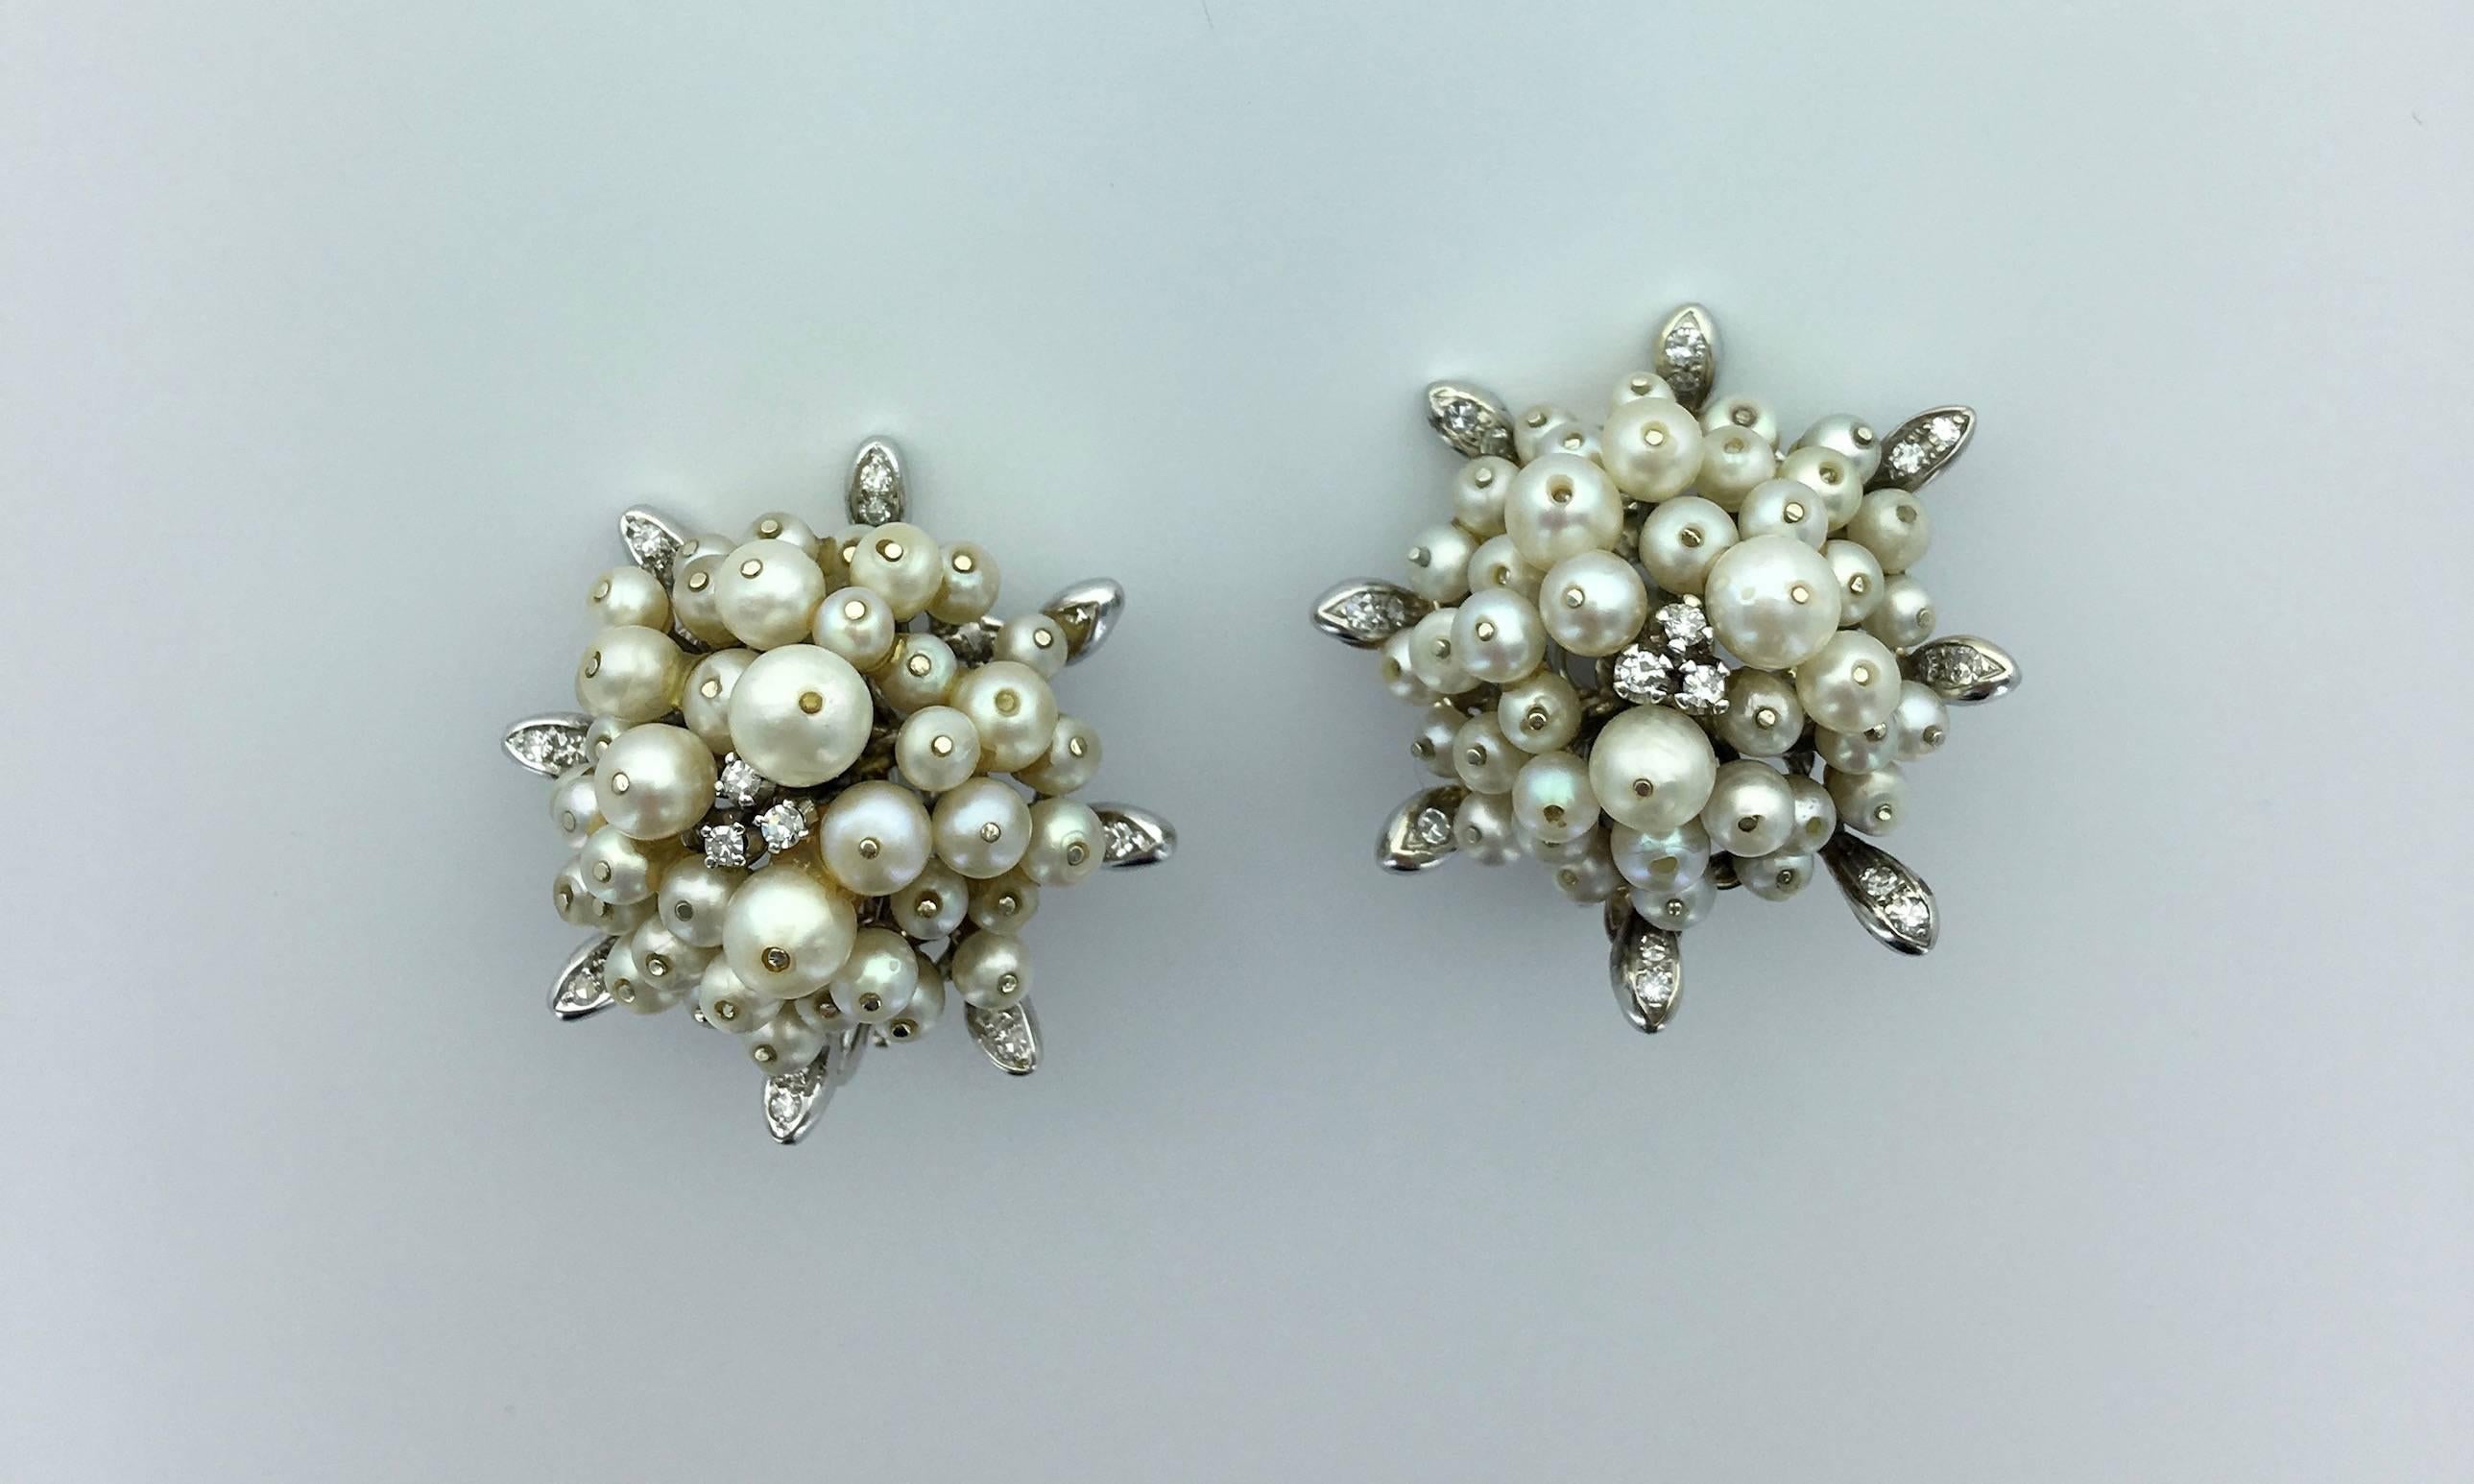 SnowFlakes Earrings reminding the spirit of Coco Chanel. 
Both Natural and Cultured Pearl surrounded by Diamond on White Gold 18k 750.
Circa 1955.

Gross weight: 32.99 grams.